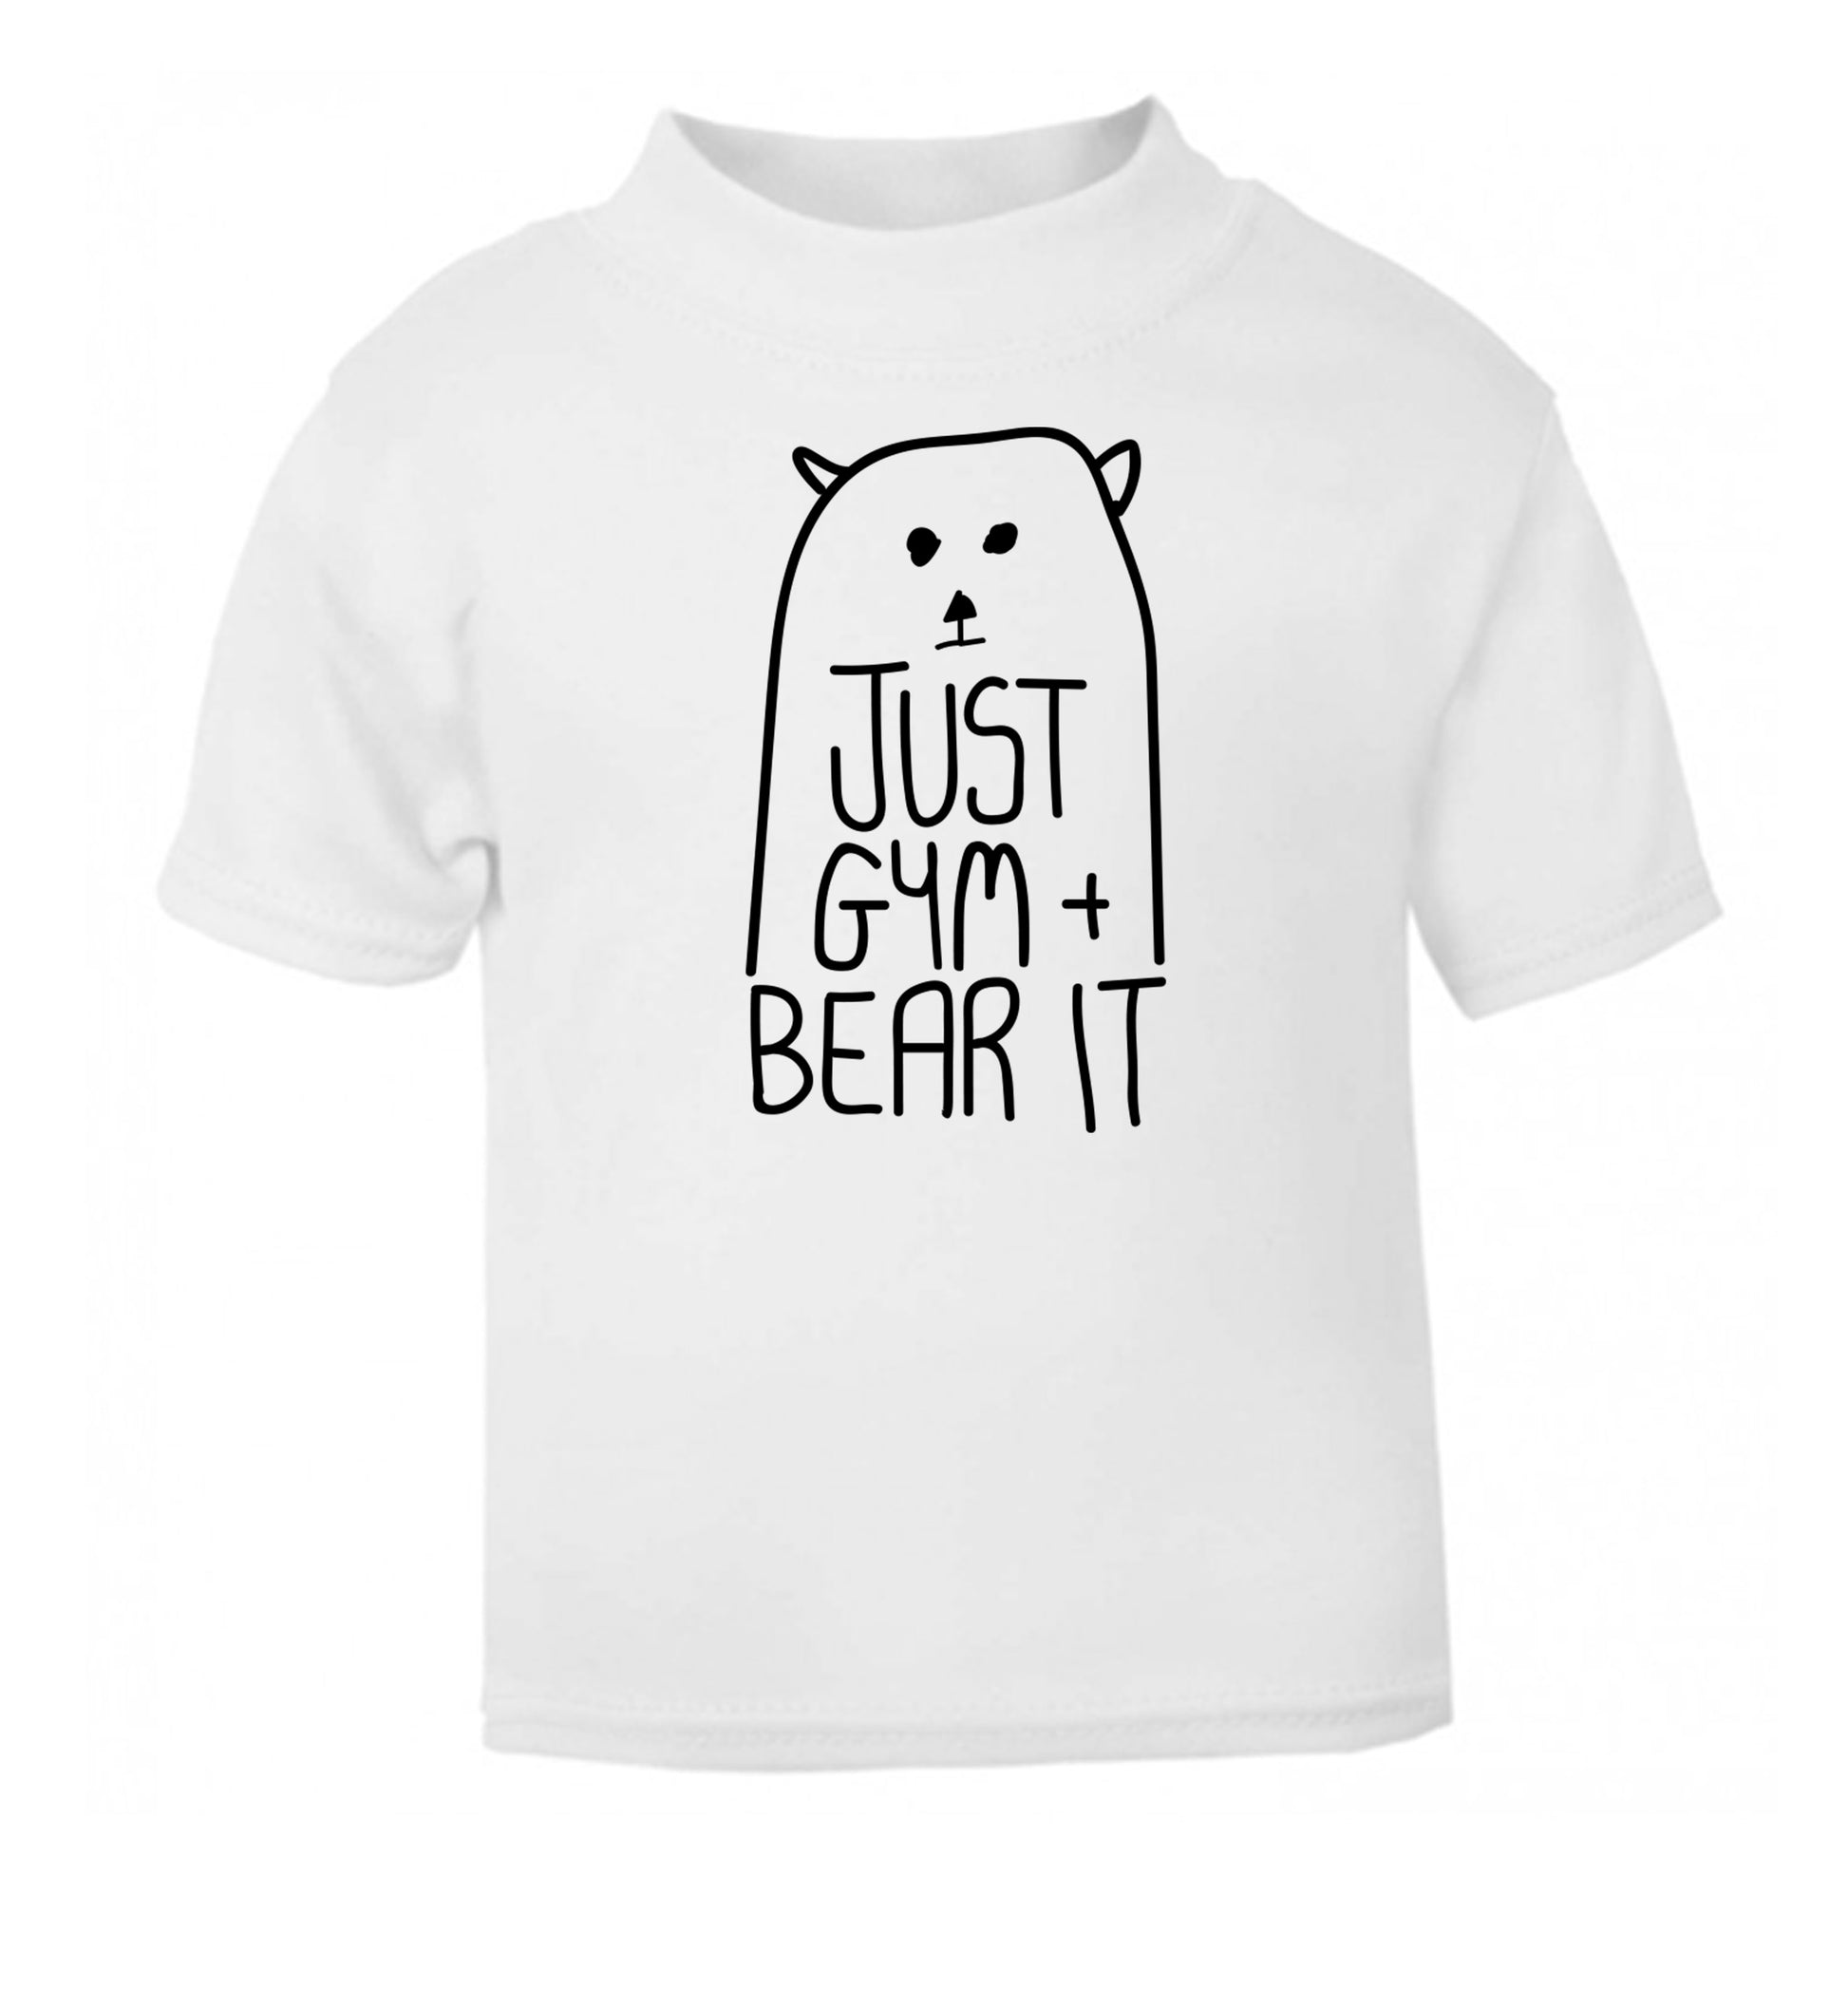 Just gym and bear it white Baby Toddler Tshirt 2 Years